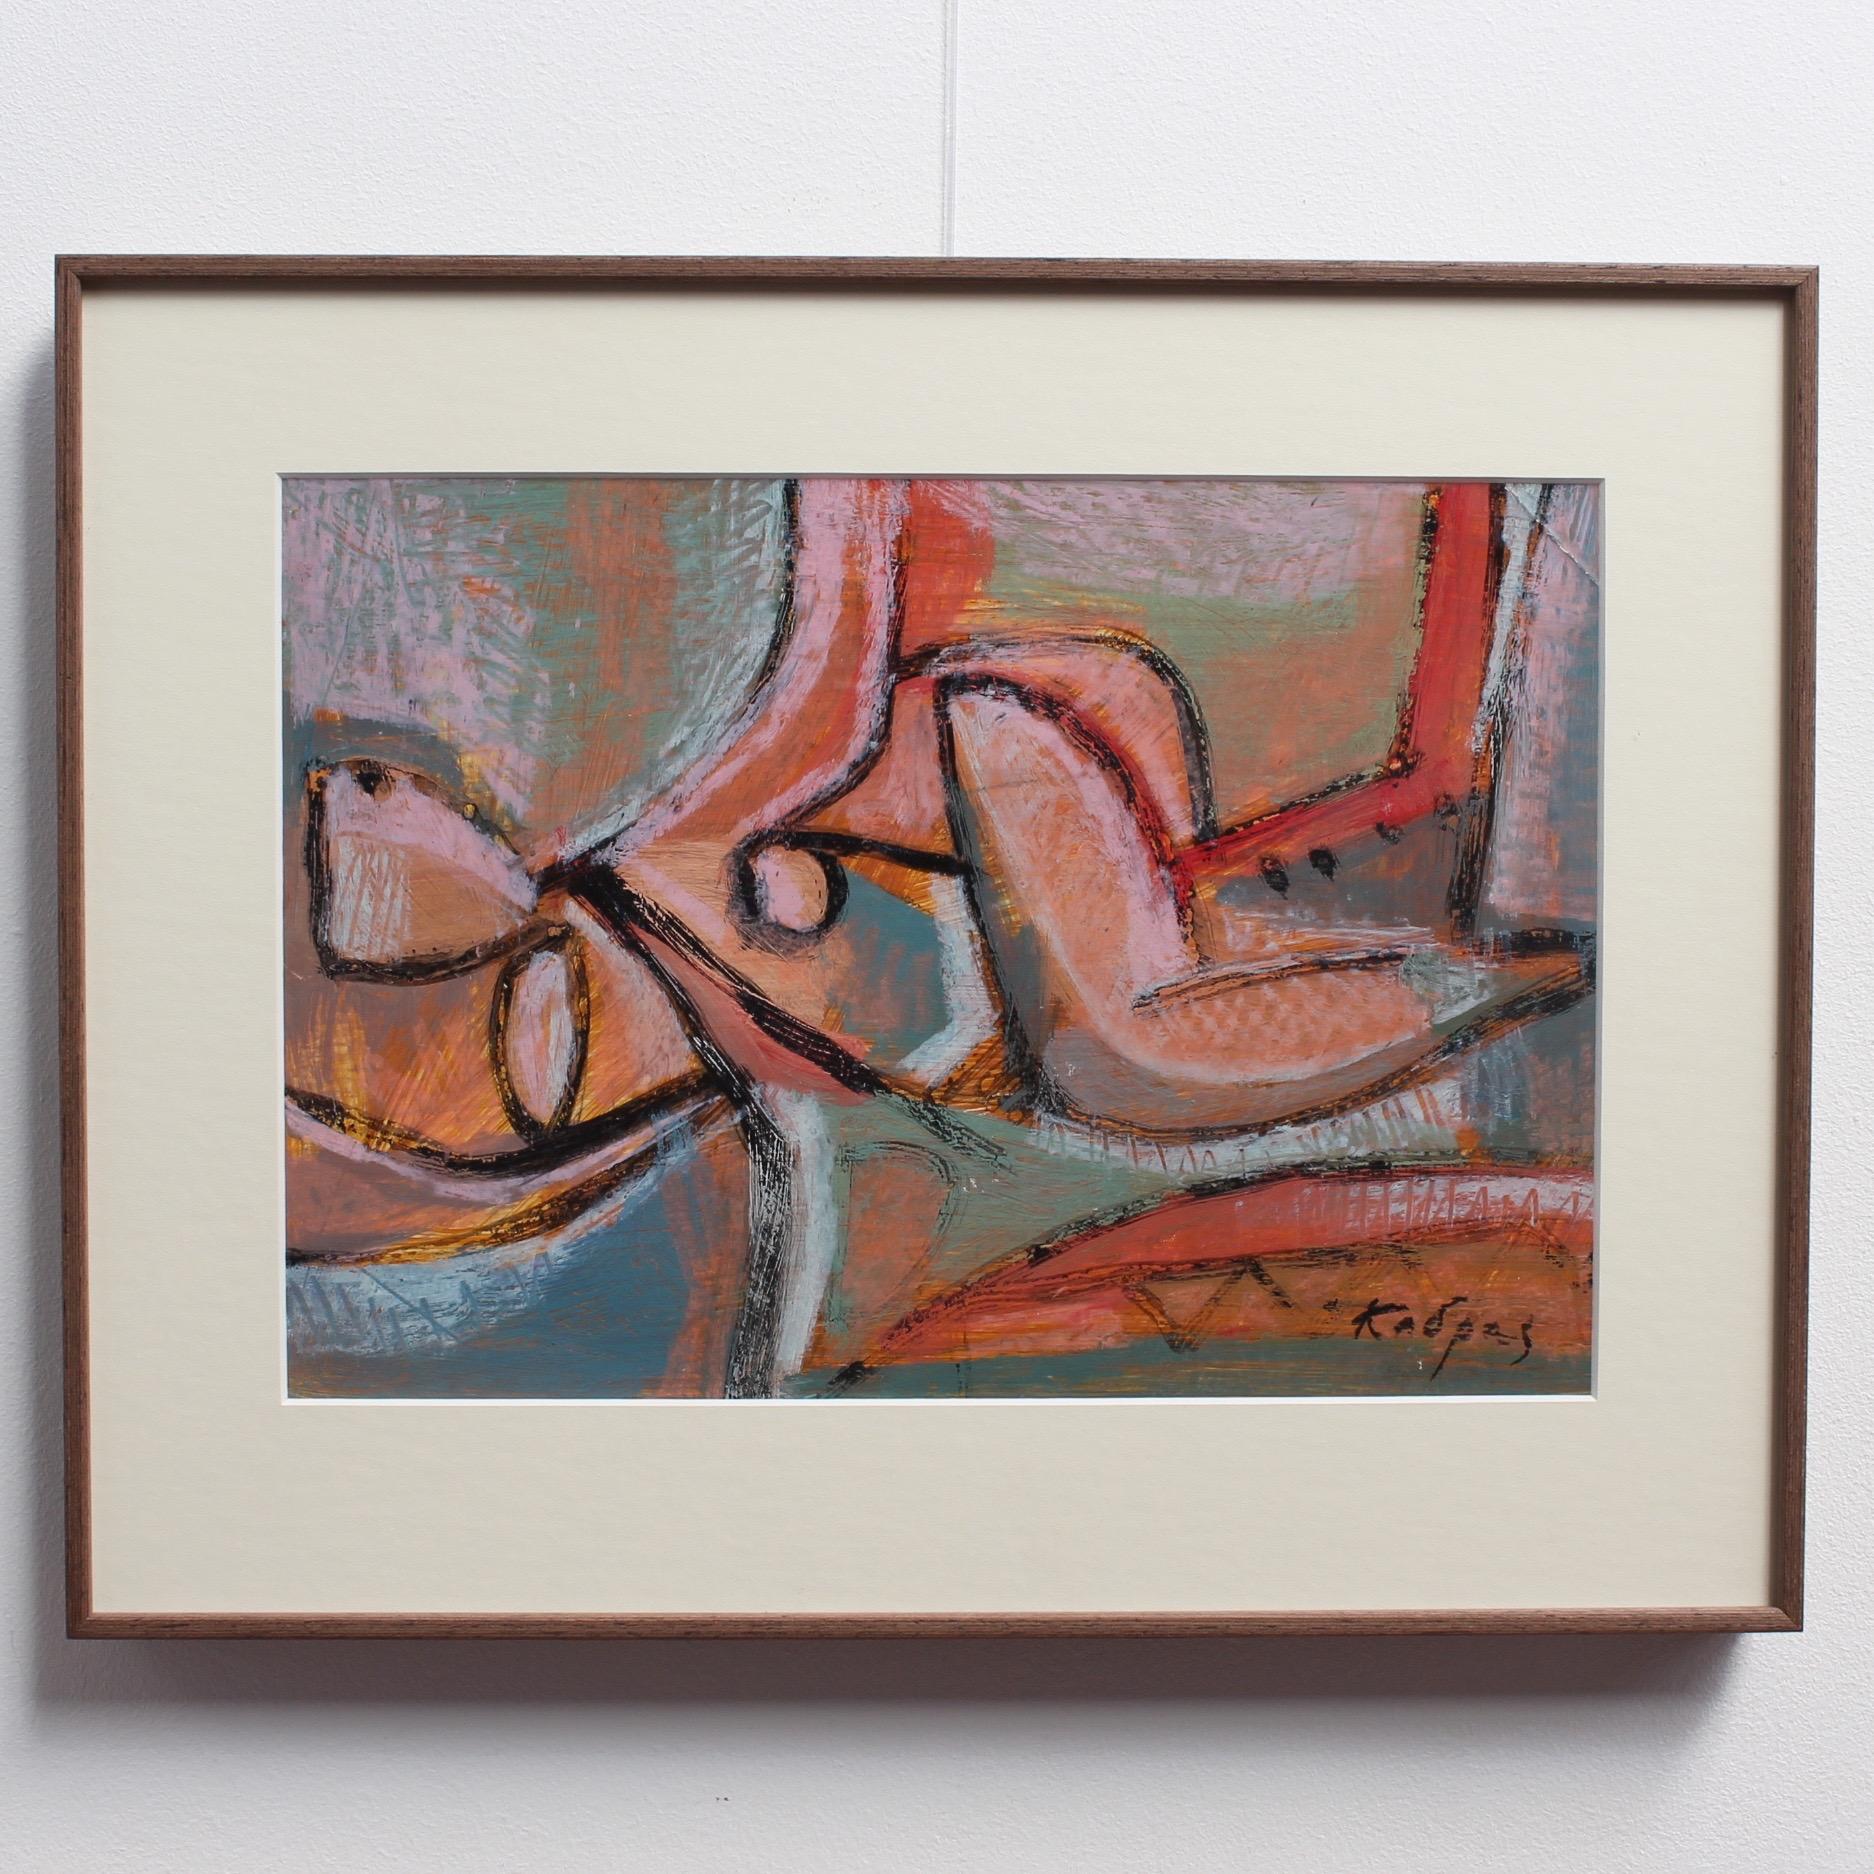 Reclining Woman in Abstract - Painting by Yiannis Kadras